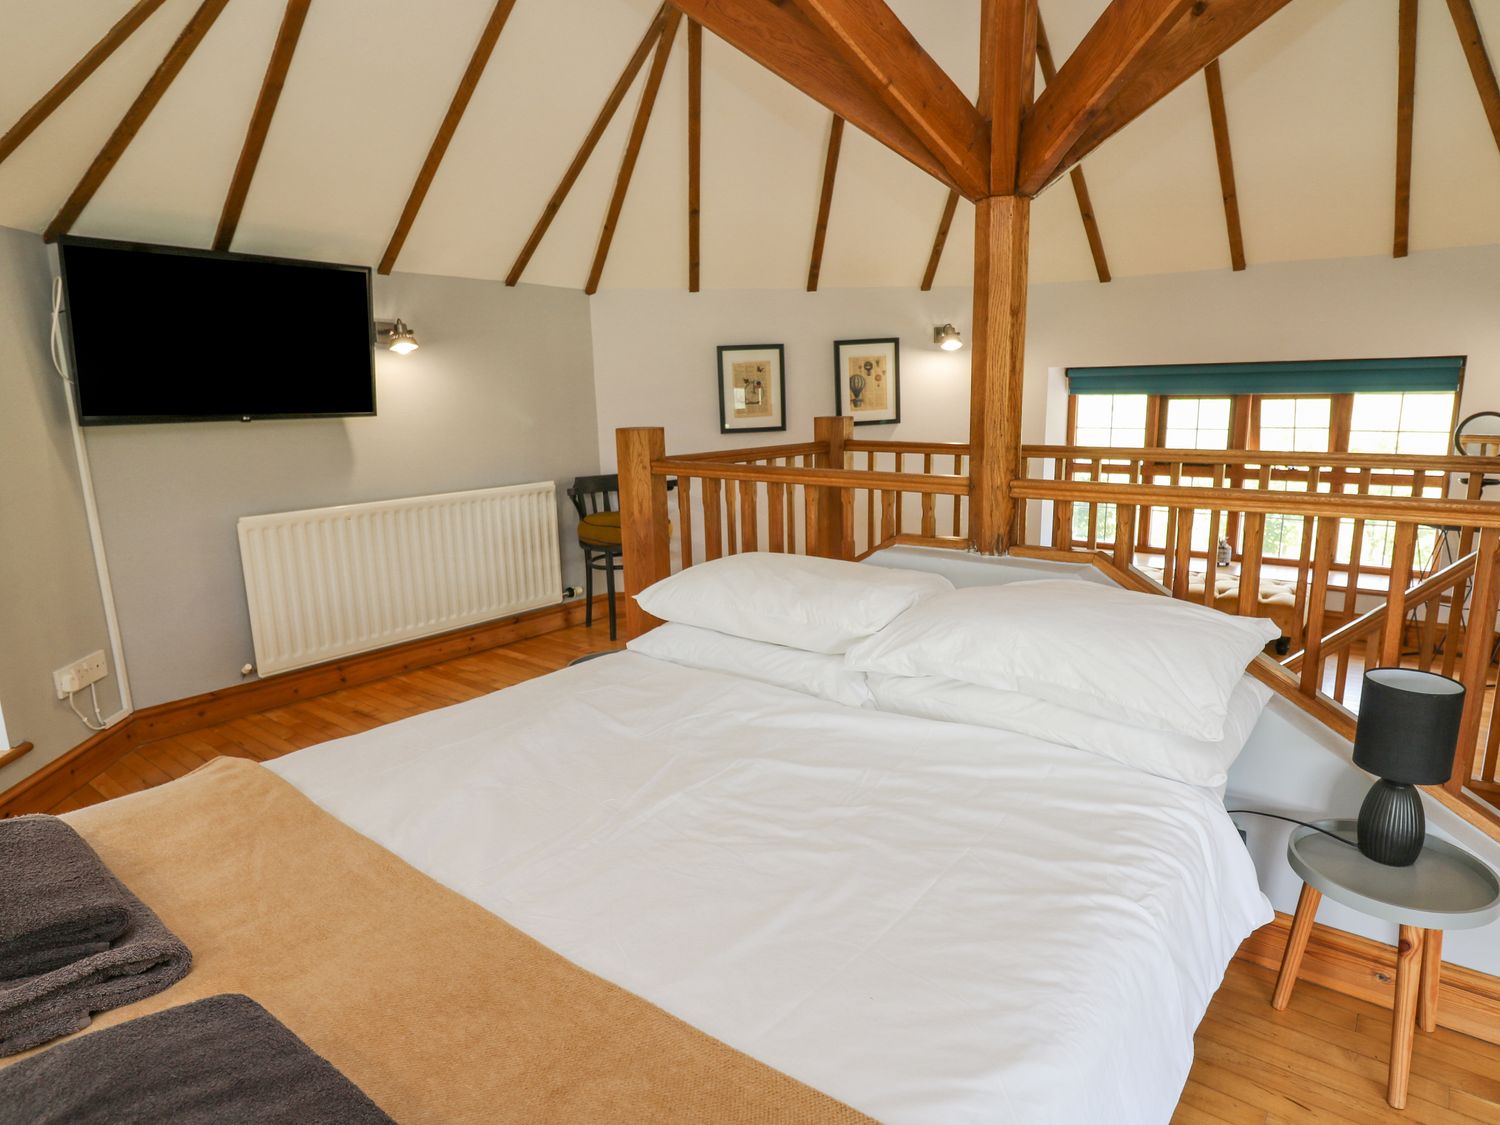 Nanthir nearby Rhayader, Powys. Set in spacious grounds. Over three floors. Five bedrooms & hot tub.